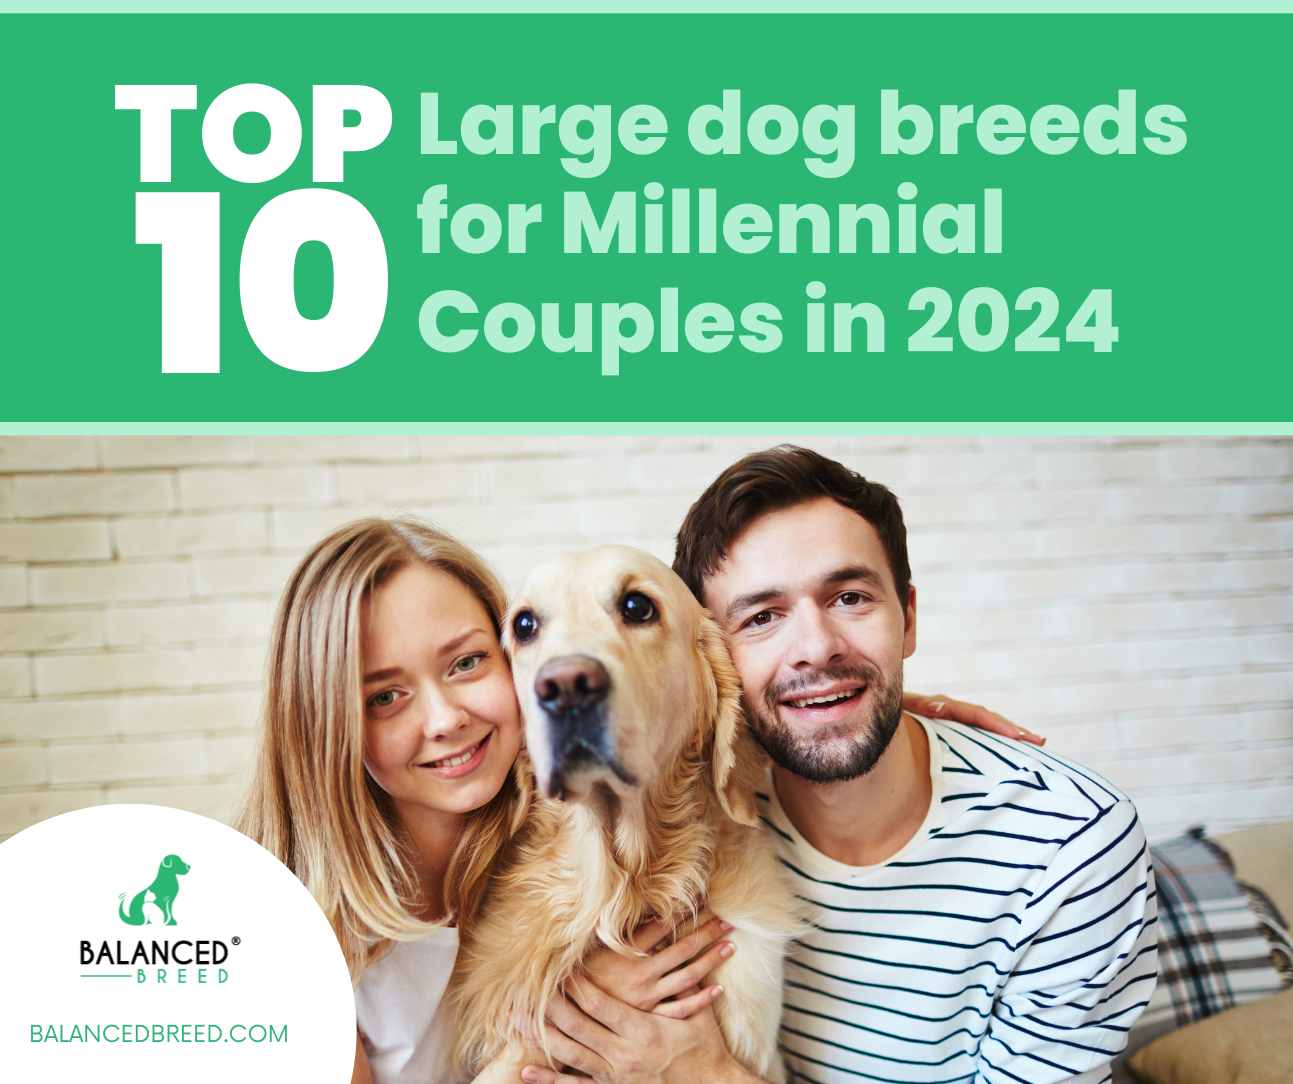 Top 10 Dog Breeds for Millennial Couples in 2024